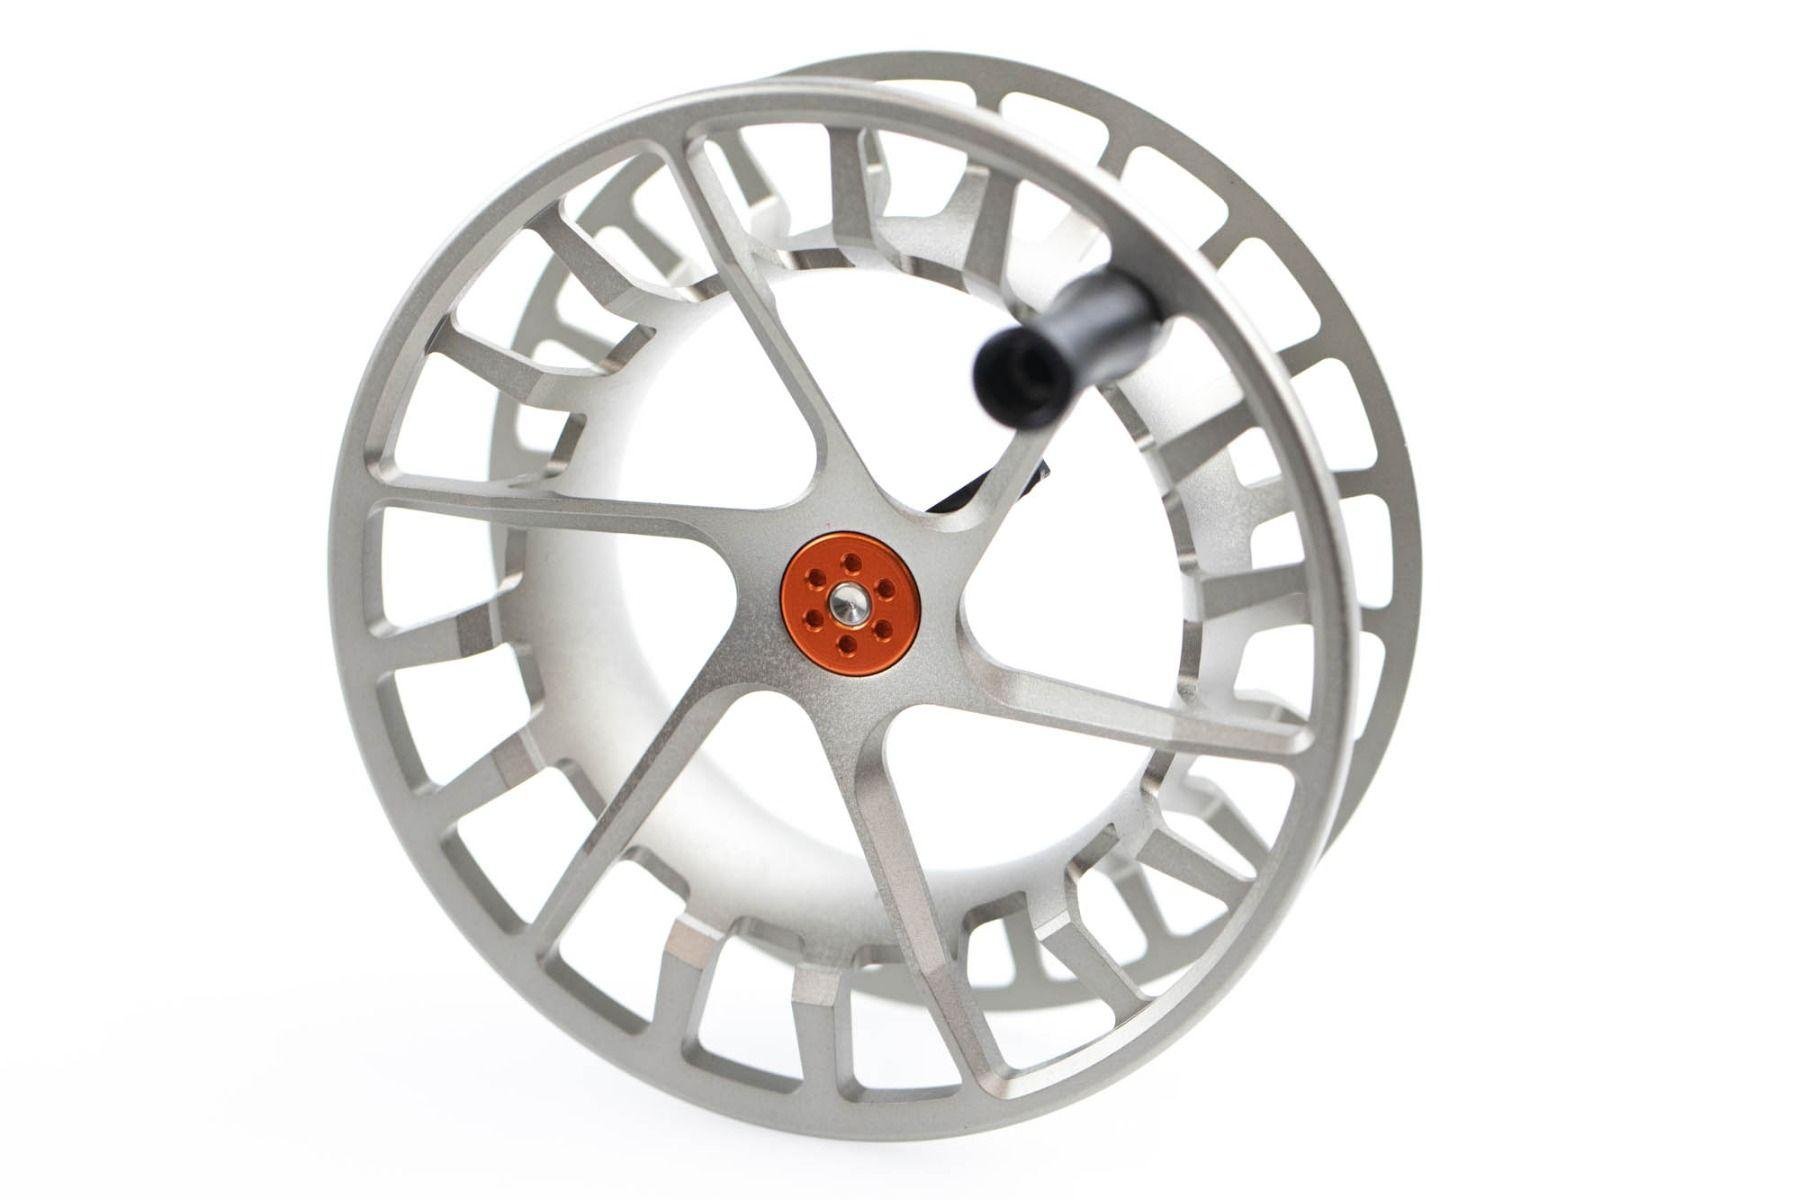 Lamson SPEEDSTER S Fly Fishing Reels — Rogue Valley Anglers